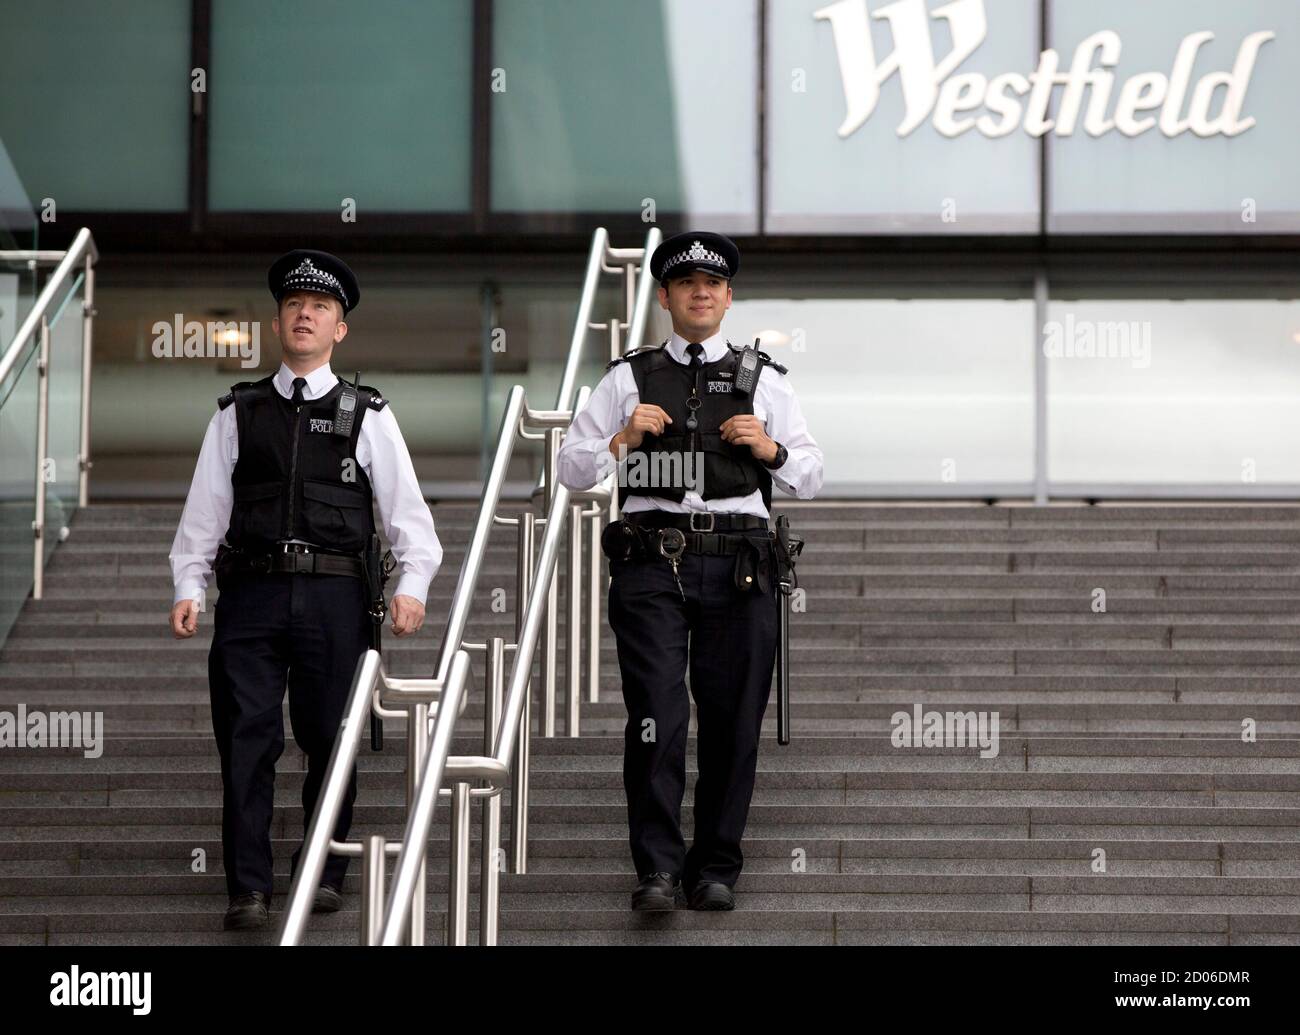 Police officers patrol around the Westfield Shopping Centre, a major gateway for visitors to the London 2012 Olympic Park, in Stratford, east London, July 19, 2012. REUTERS/Neil Hall (BRITAIN - Tags: SPORT OLYMPICS BUSINESS) Stock Photo